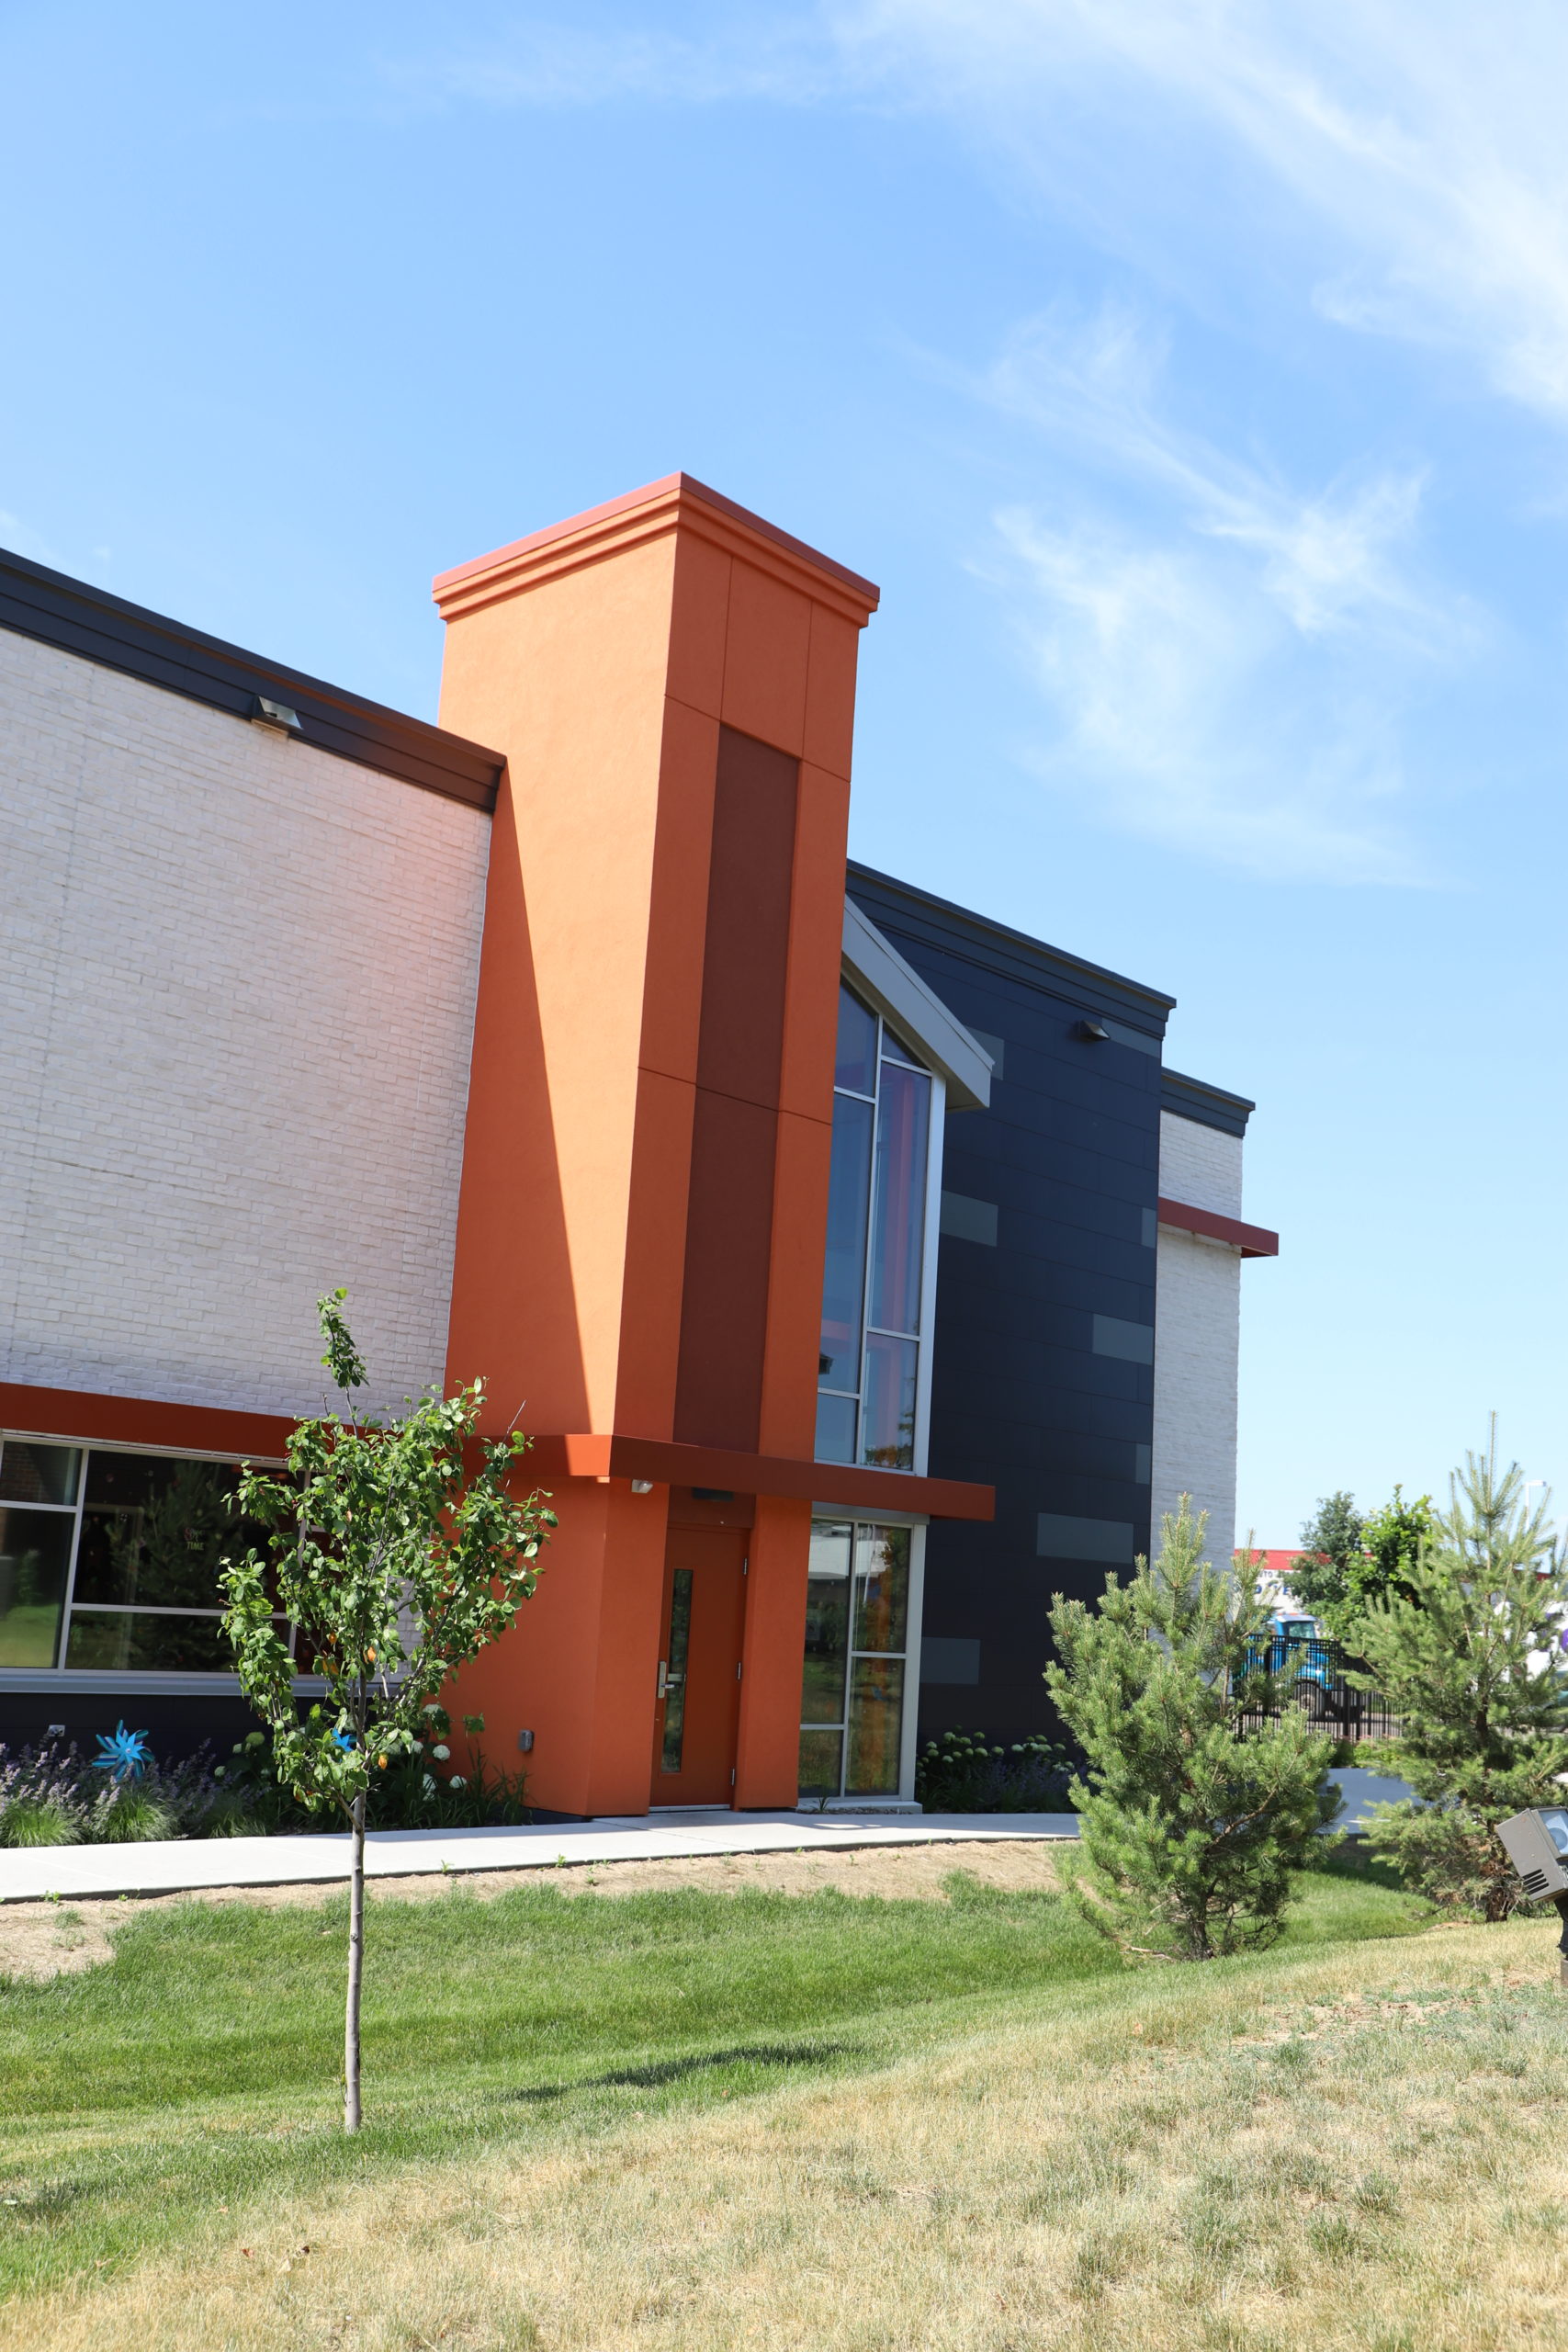 Large commercial building featuring big orange pillar on the side in Apple Valley, MN.